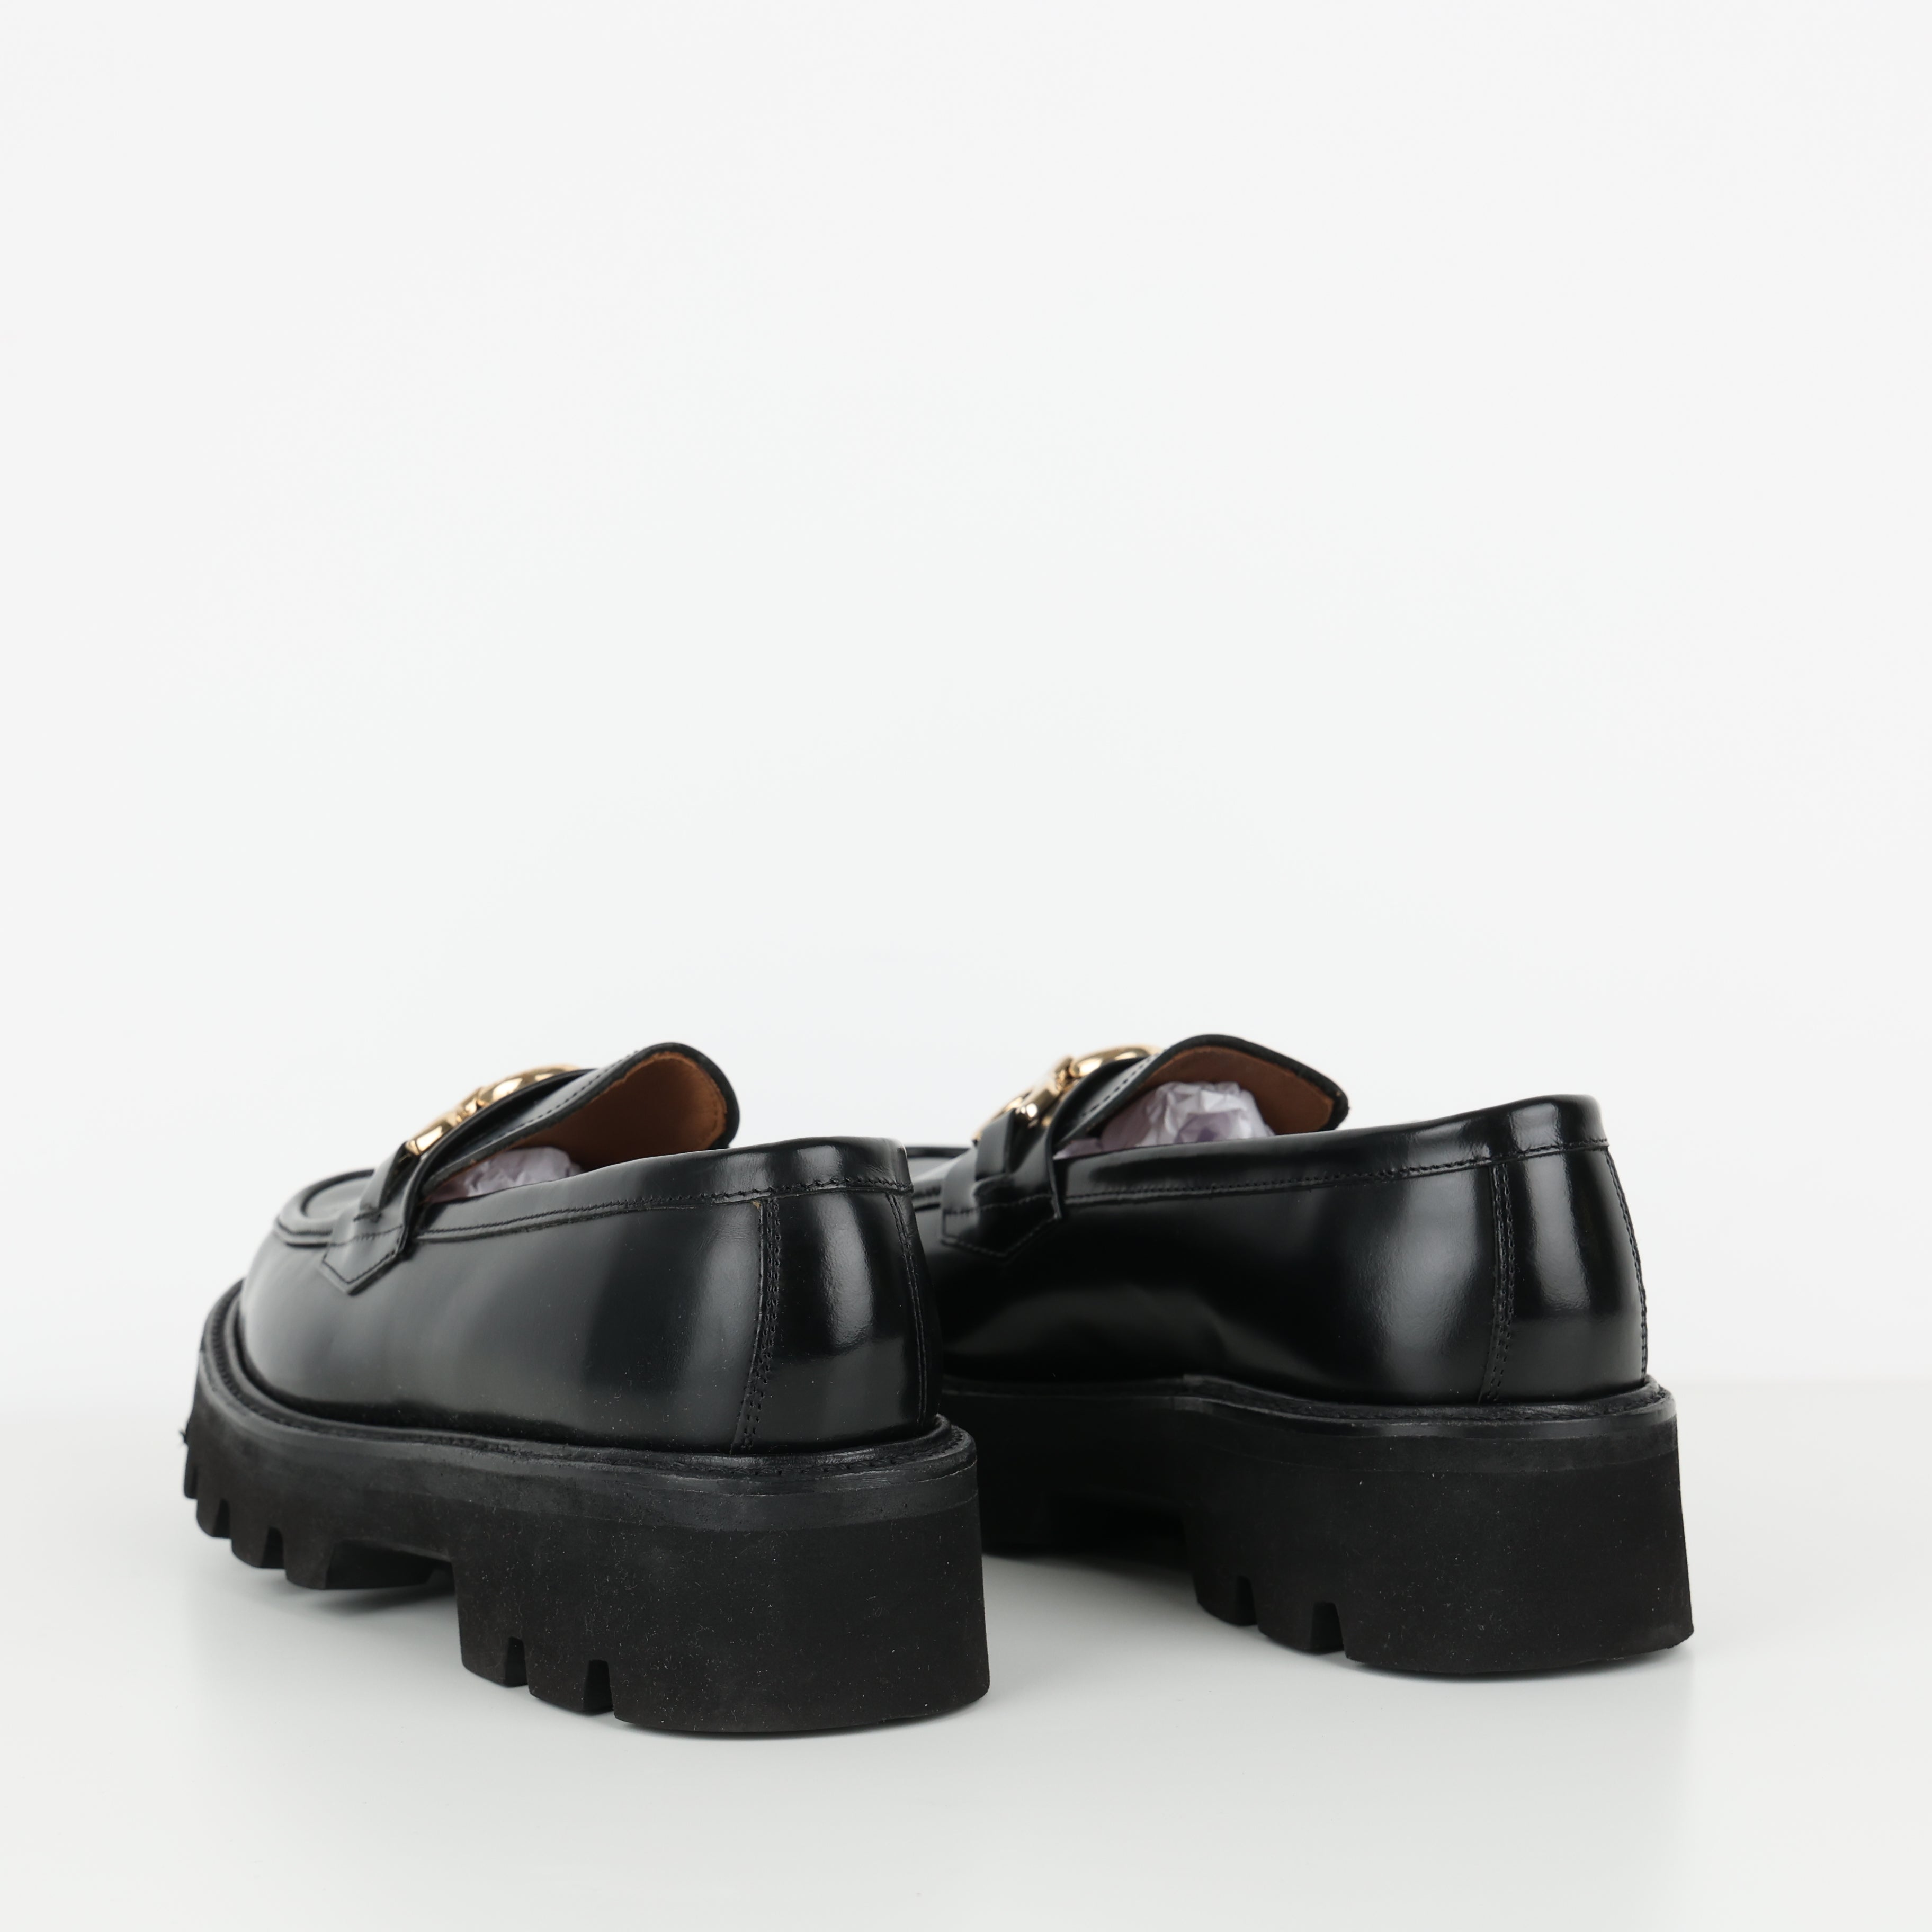 Loafers , Shoe Size 40